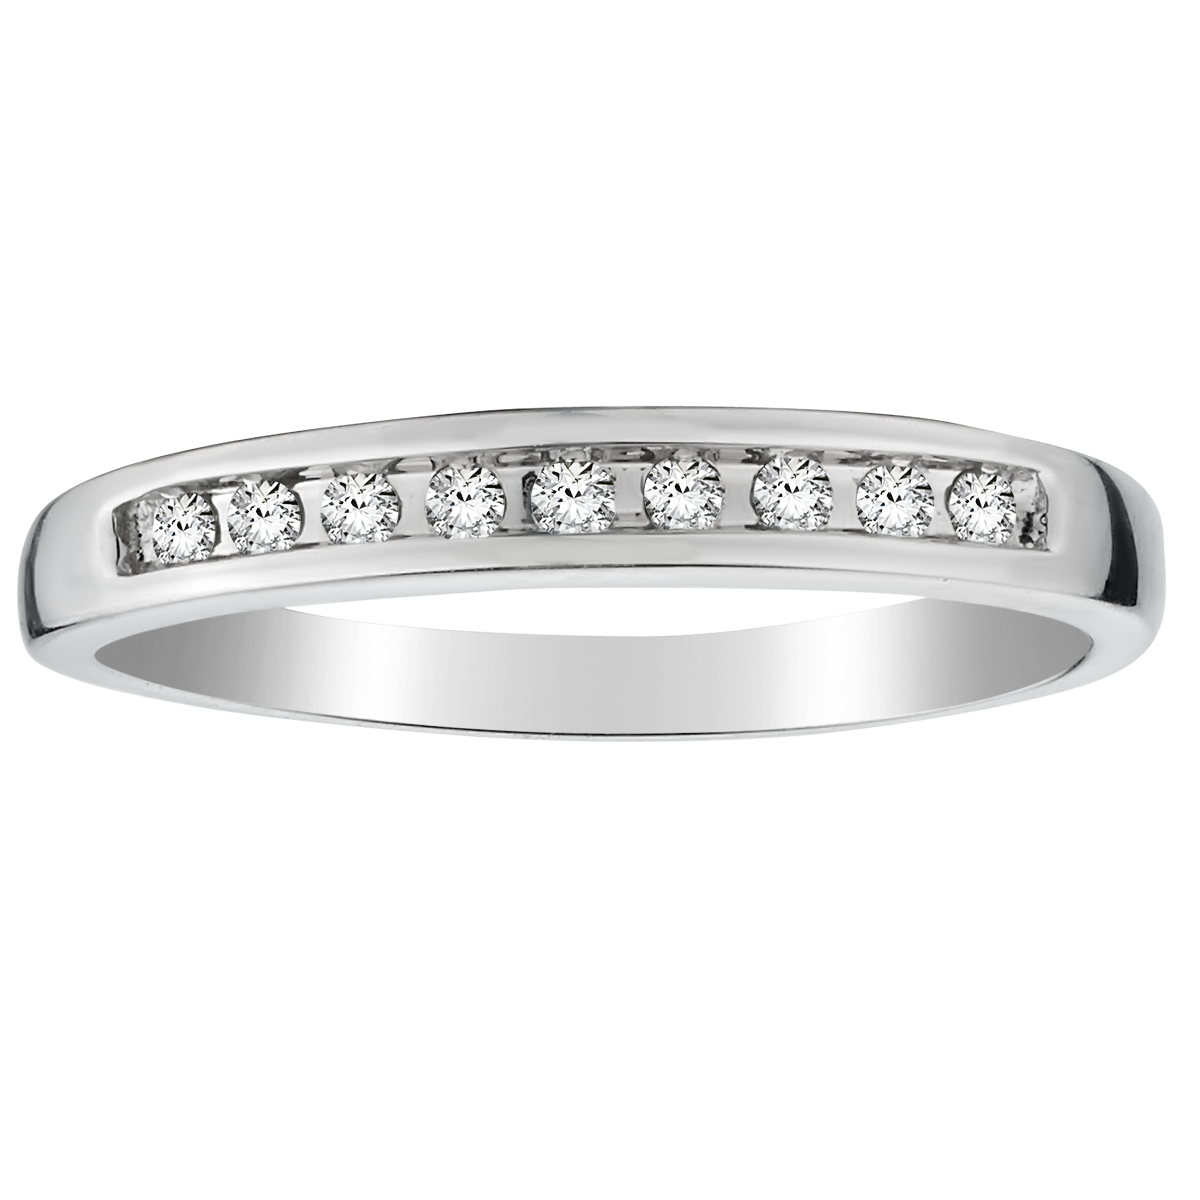 .11 Carat of Diamonds Channel Set Band, Silver......................NOW